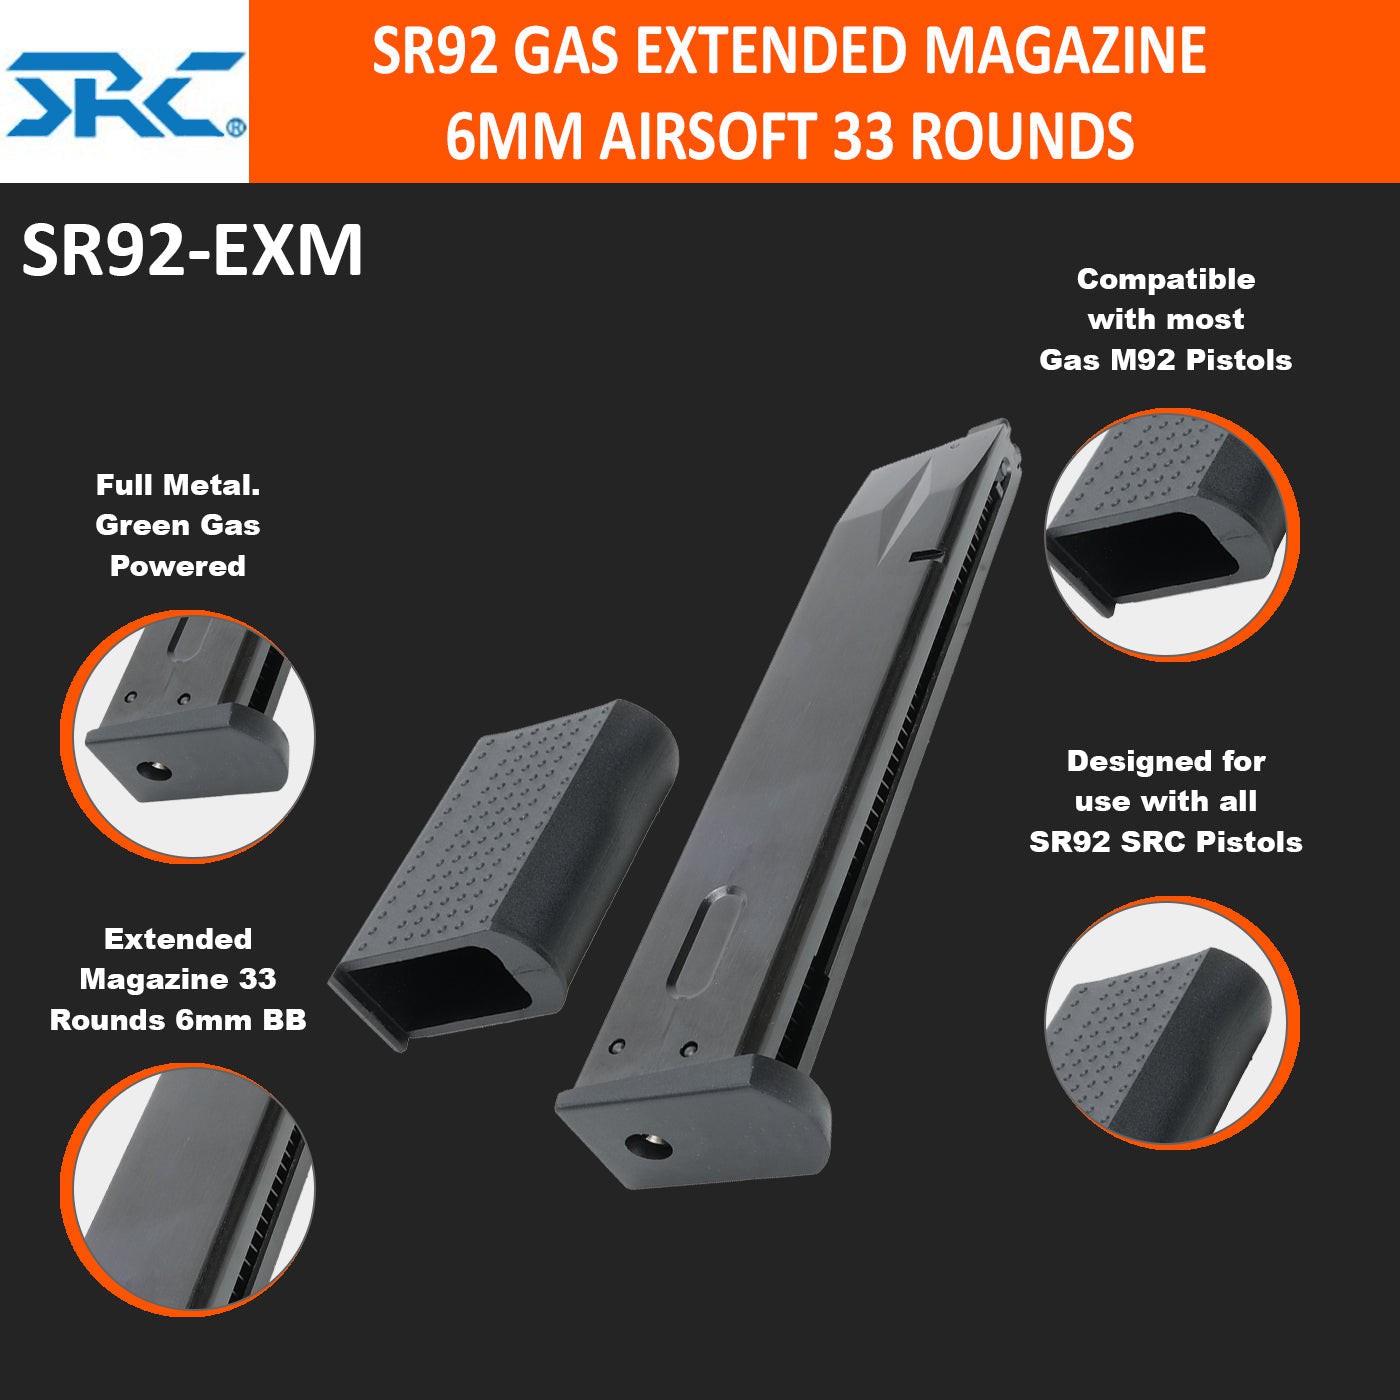 SRC SR92 GAS EXTENDED MAGAZINE 6MM AIRSOFT 33 ROUNDS